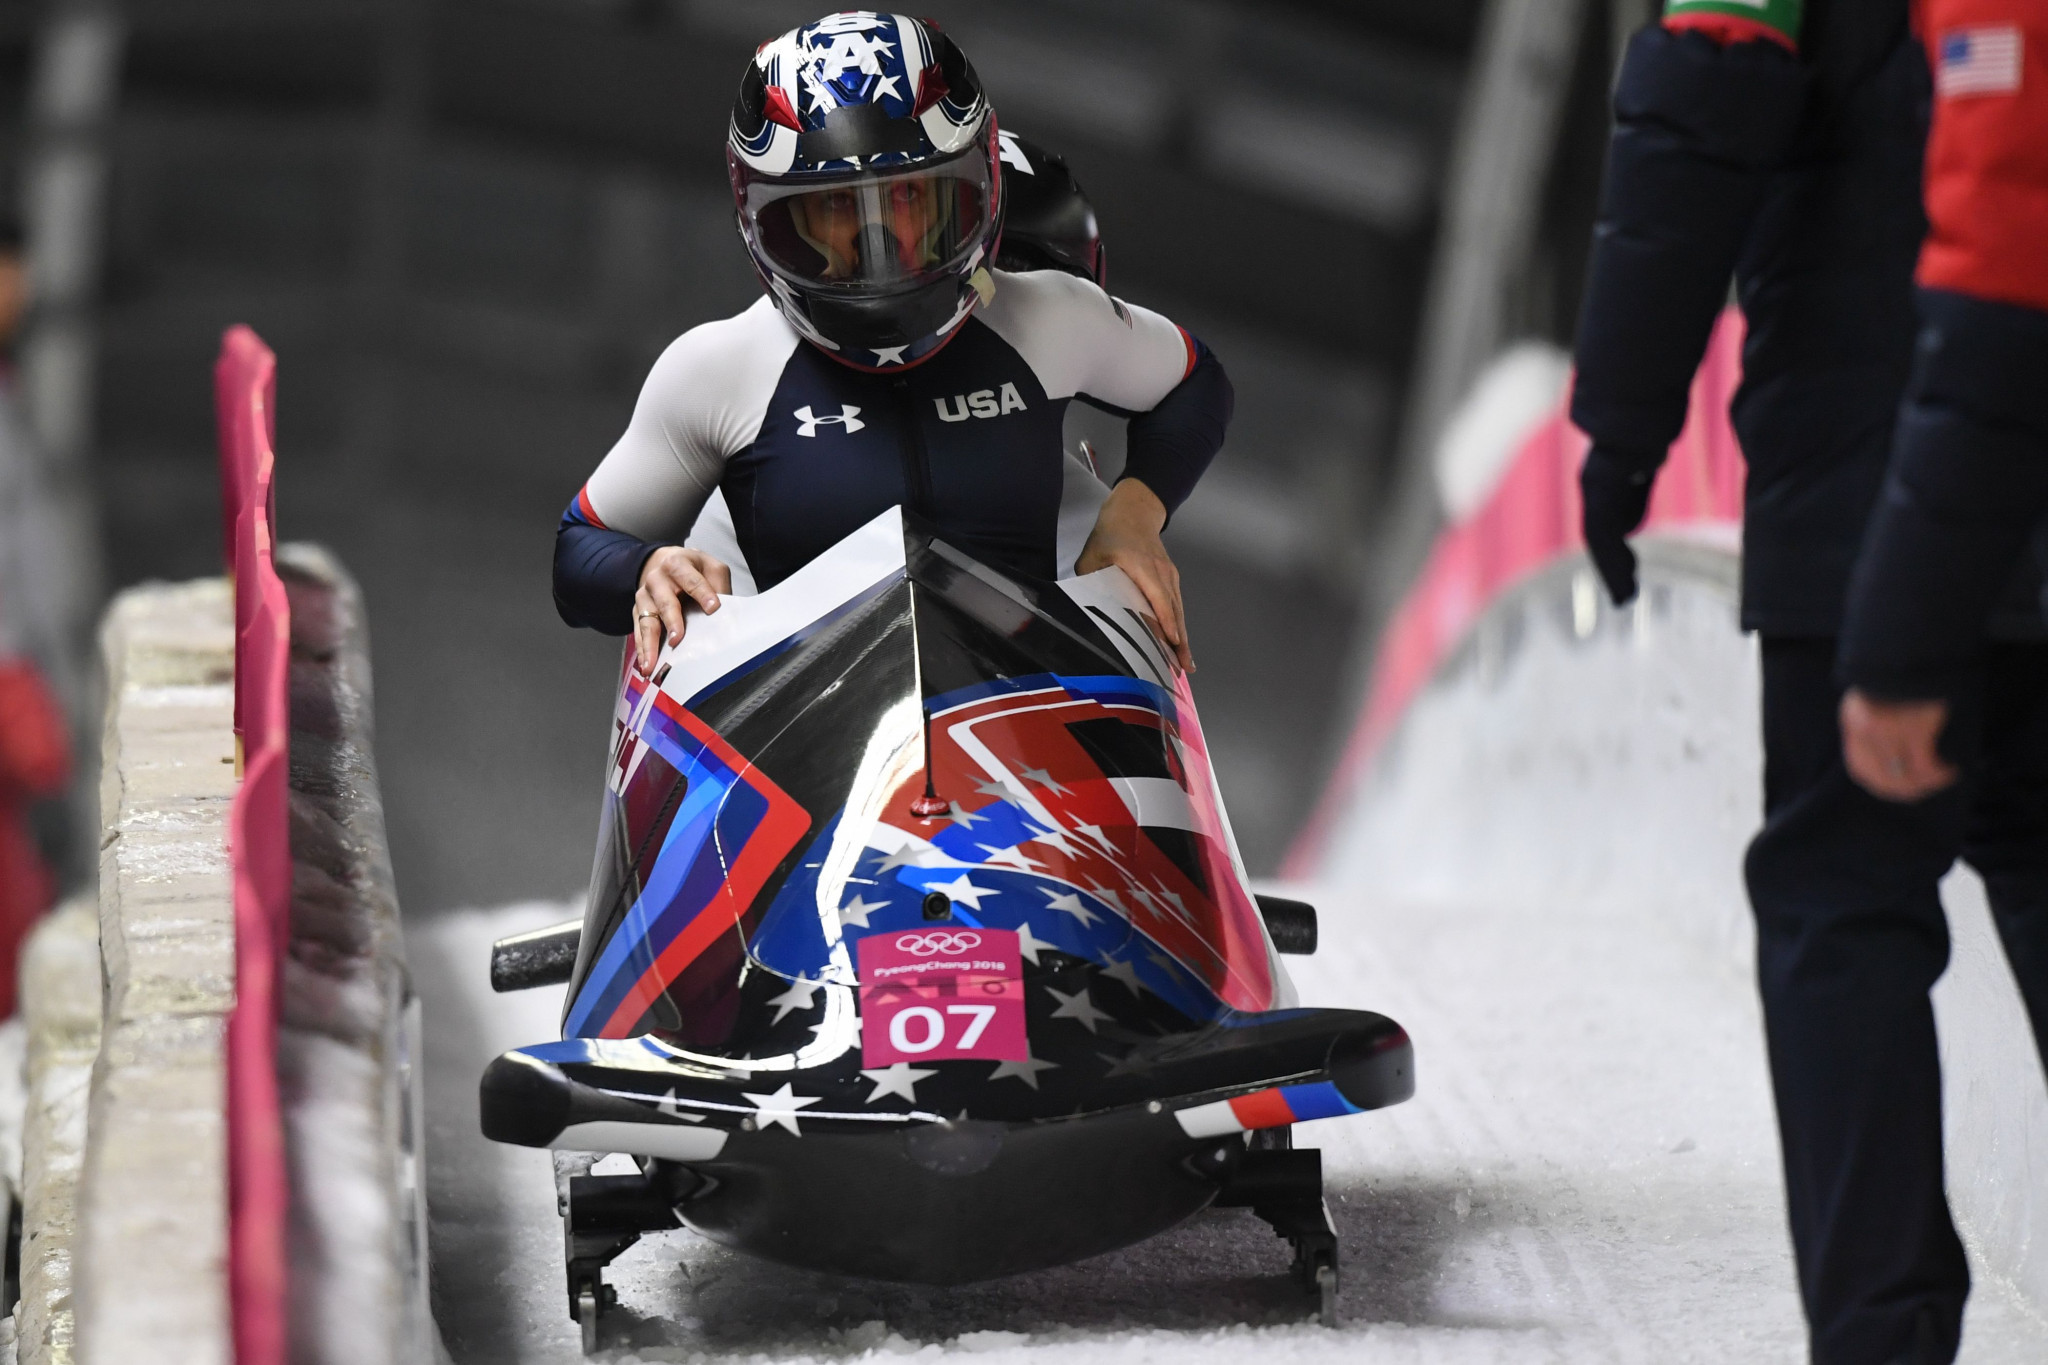 Amercian bobsleigh pilot Jamie Greubel Poser competes at the 2018 Pyeongchang Winter Olympic Games ©Getty Images